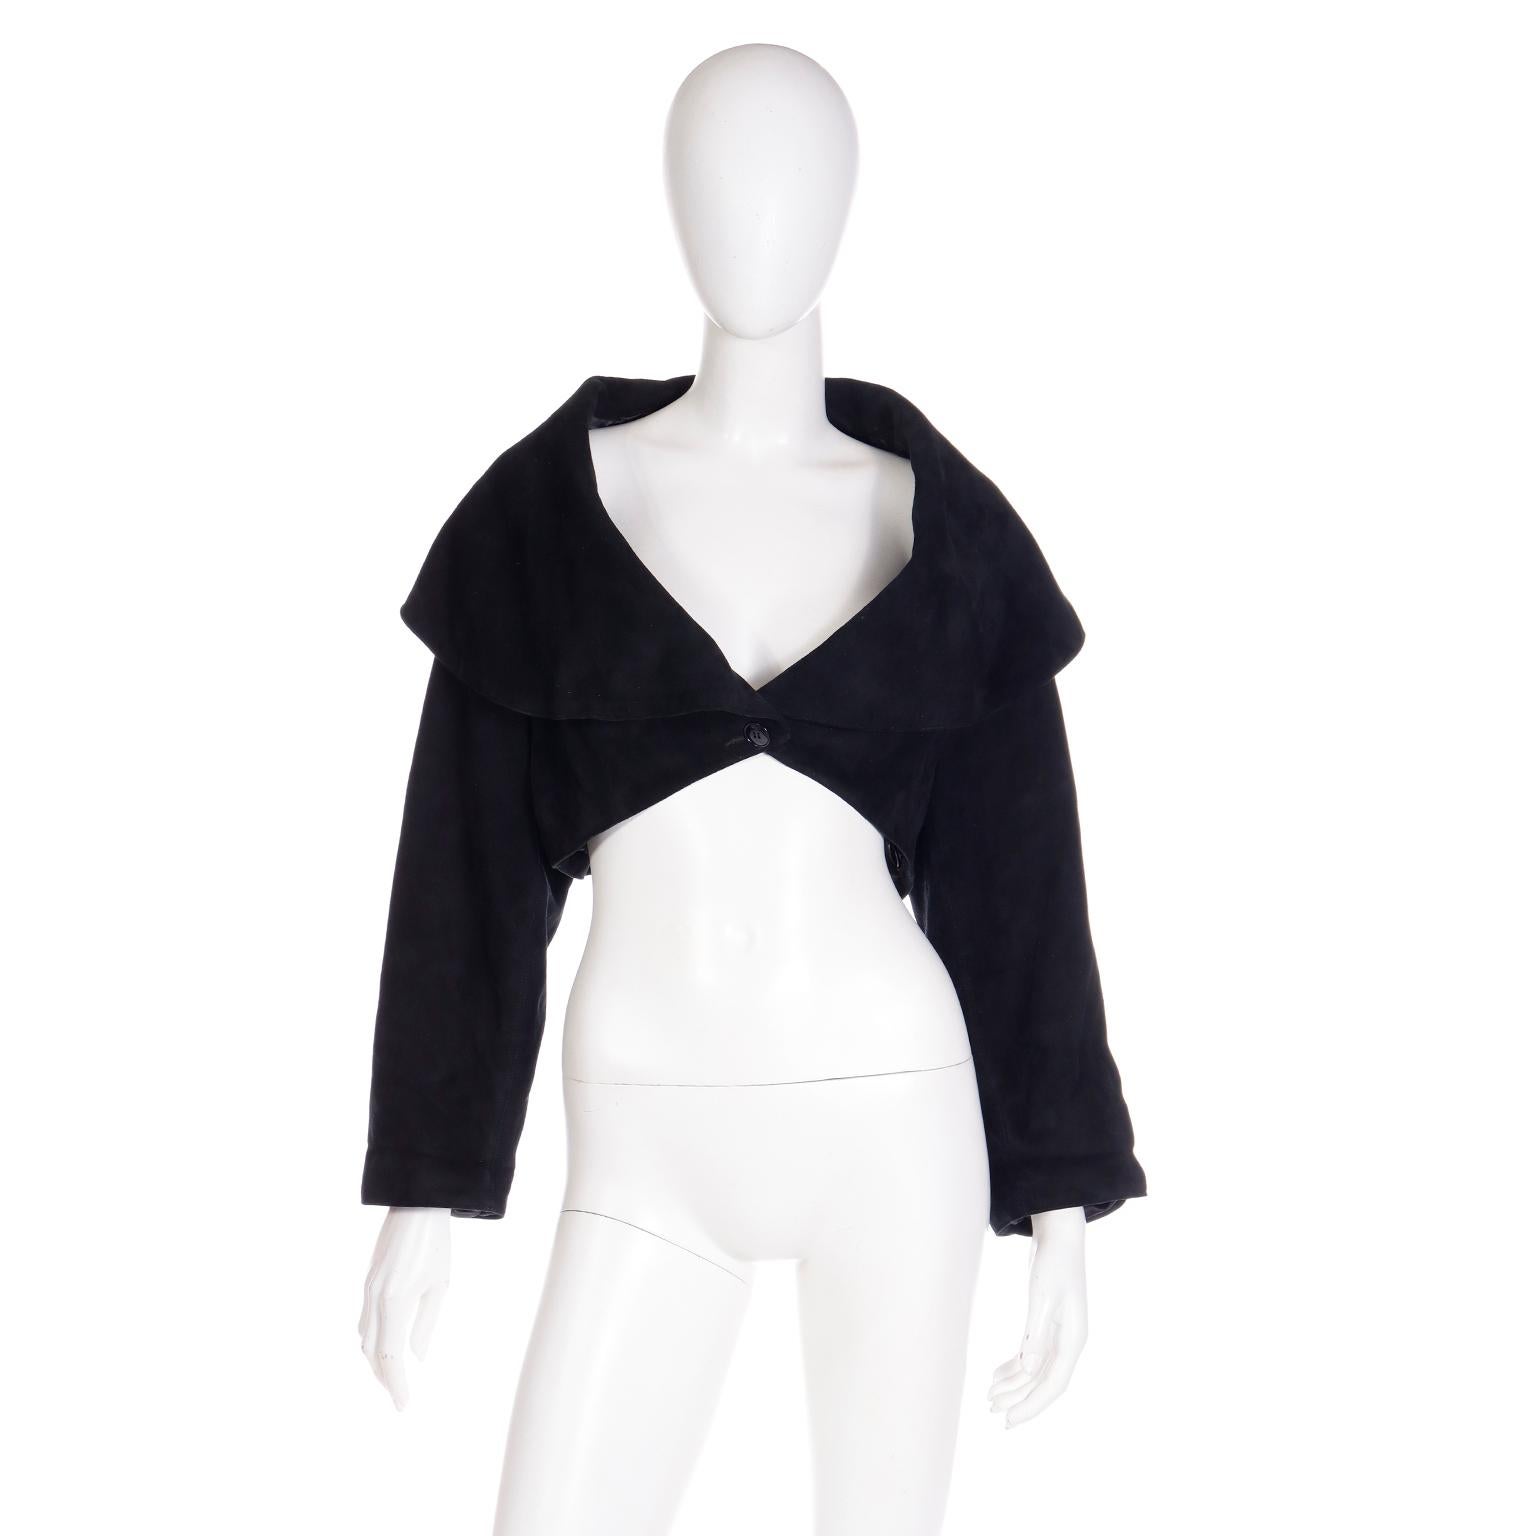 Azzedine Alaia Fall 1989 Vintage Black Lamb Suede Cropped Runway Jacket In Excellent Condition For Sale In Portland, OR